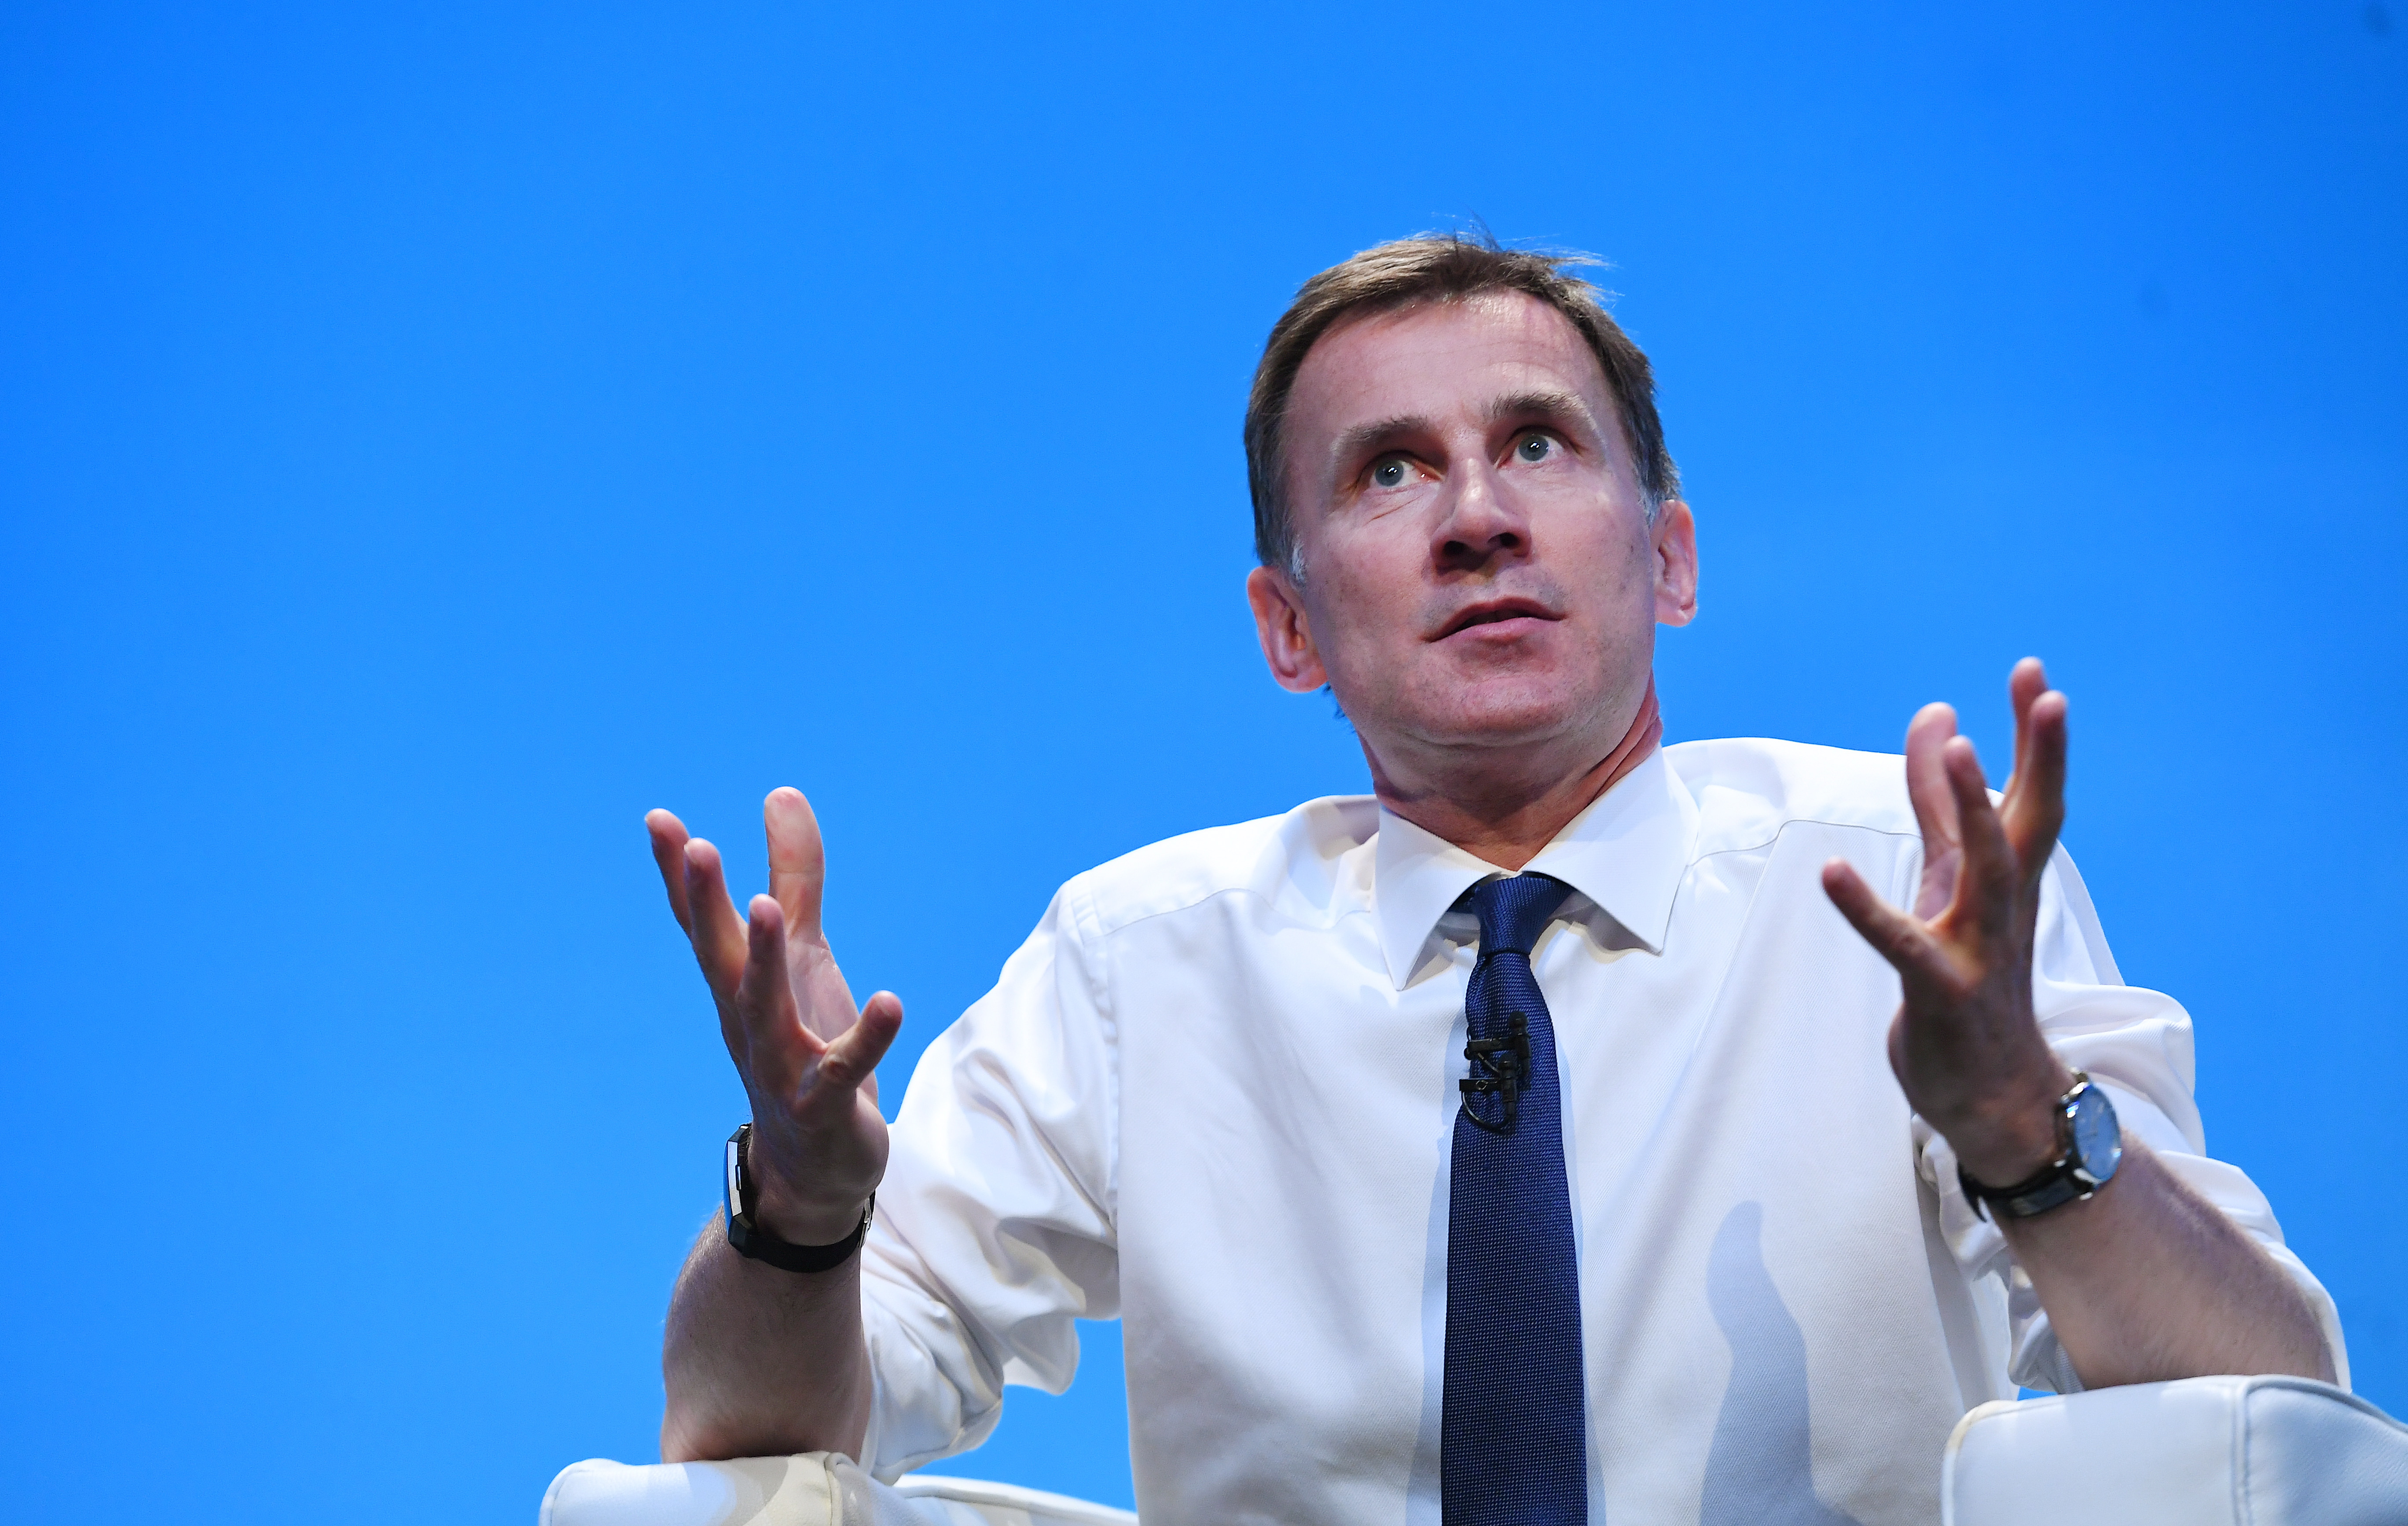 epa07666552 British Foreign Secretary Jeremy Hunt speaks to Conservative Party members at the Conservative Party leadership hustings in Birmingham, Britain, 22 June 2019. Hunt and Boris Johnson are vying to become Britain's next Prime Minister.  EPA/ANDY RAIN